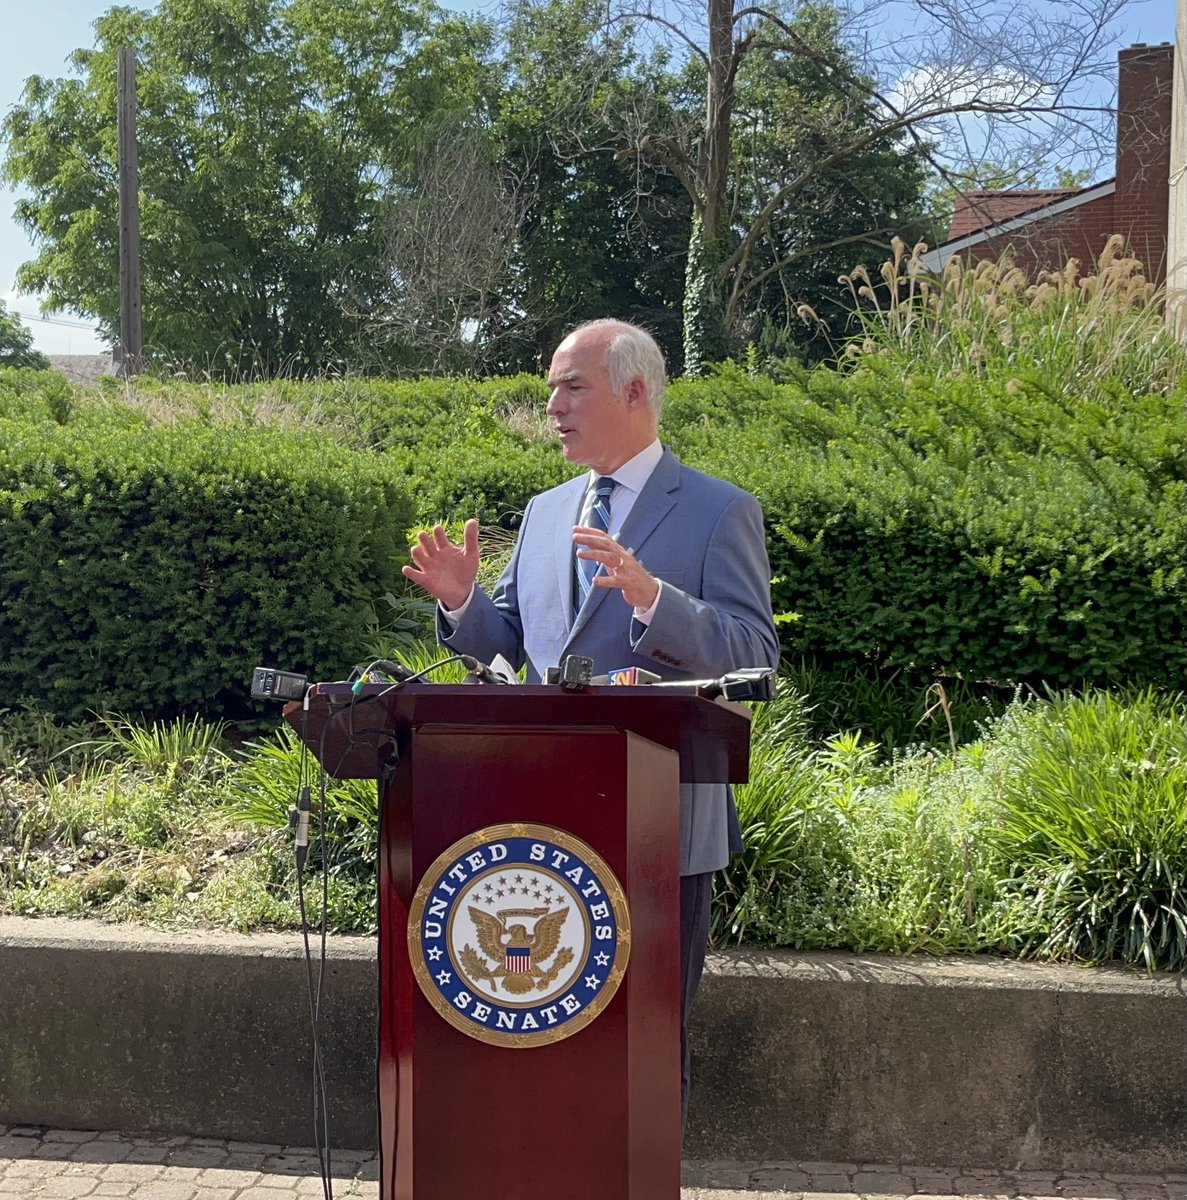 PGH LATEST: U.S. Senator Bob Casey announced a $1M federal appropriation that will enable Tree of Life to expand its mission to fight antisemitism across the state and country — through education programming @TribLIVE